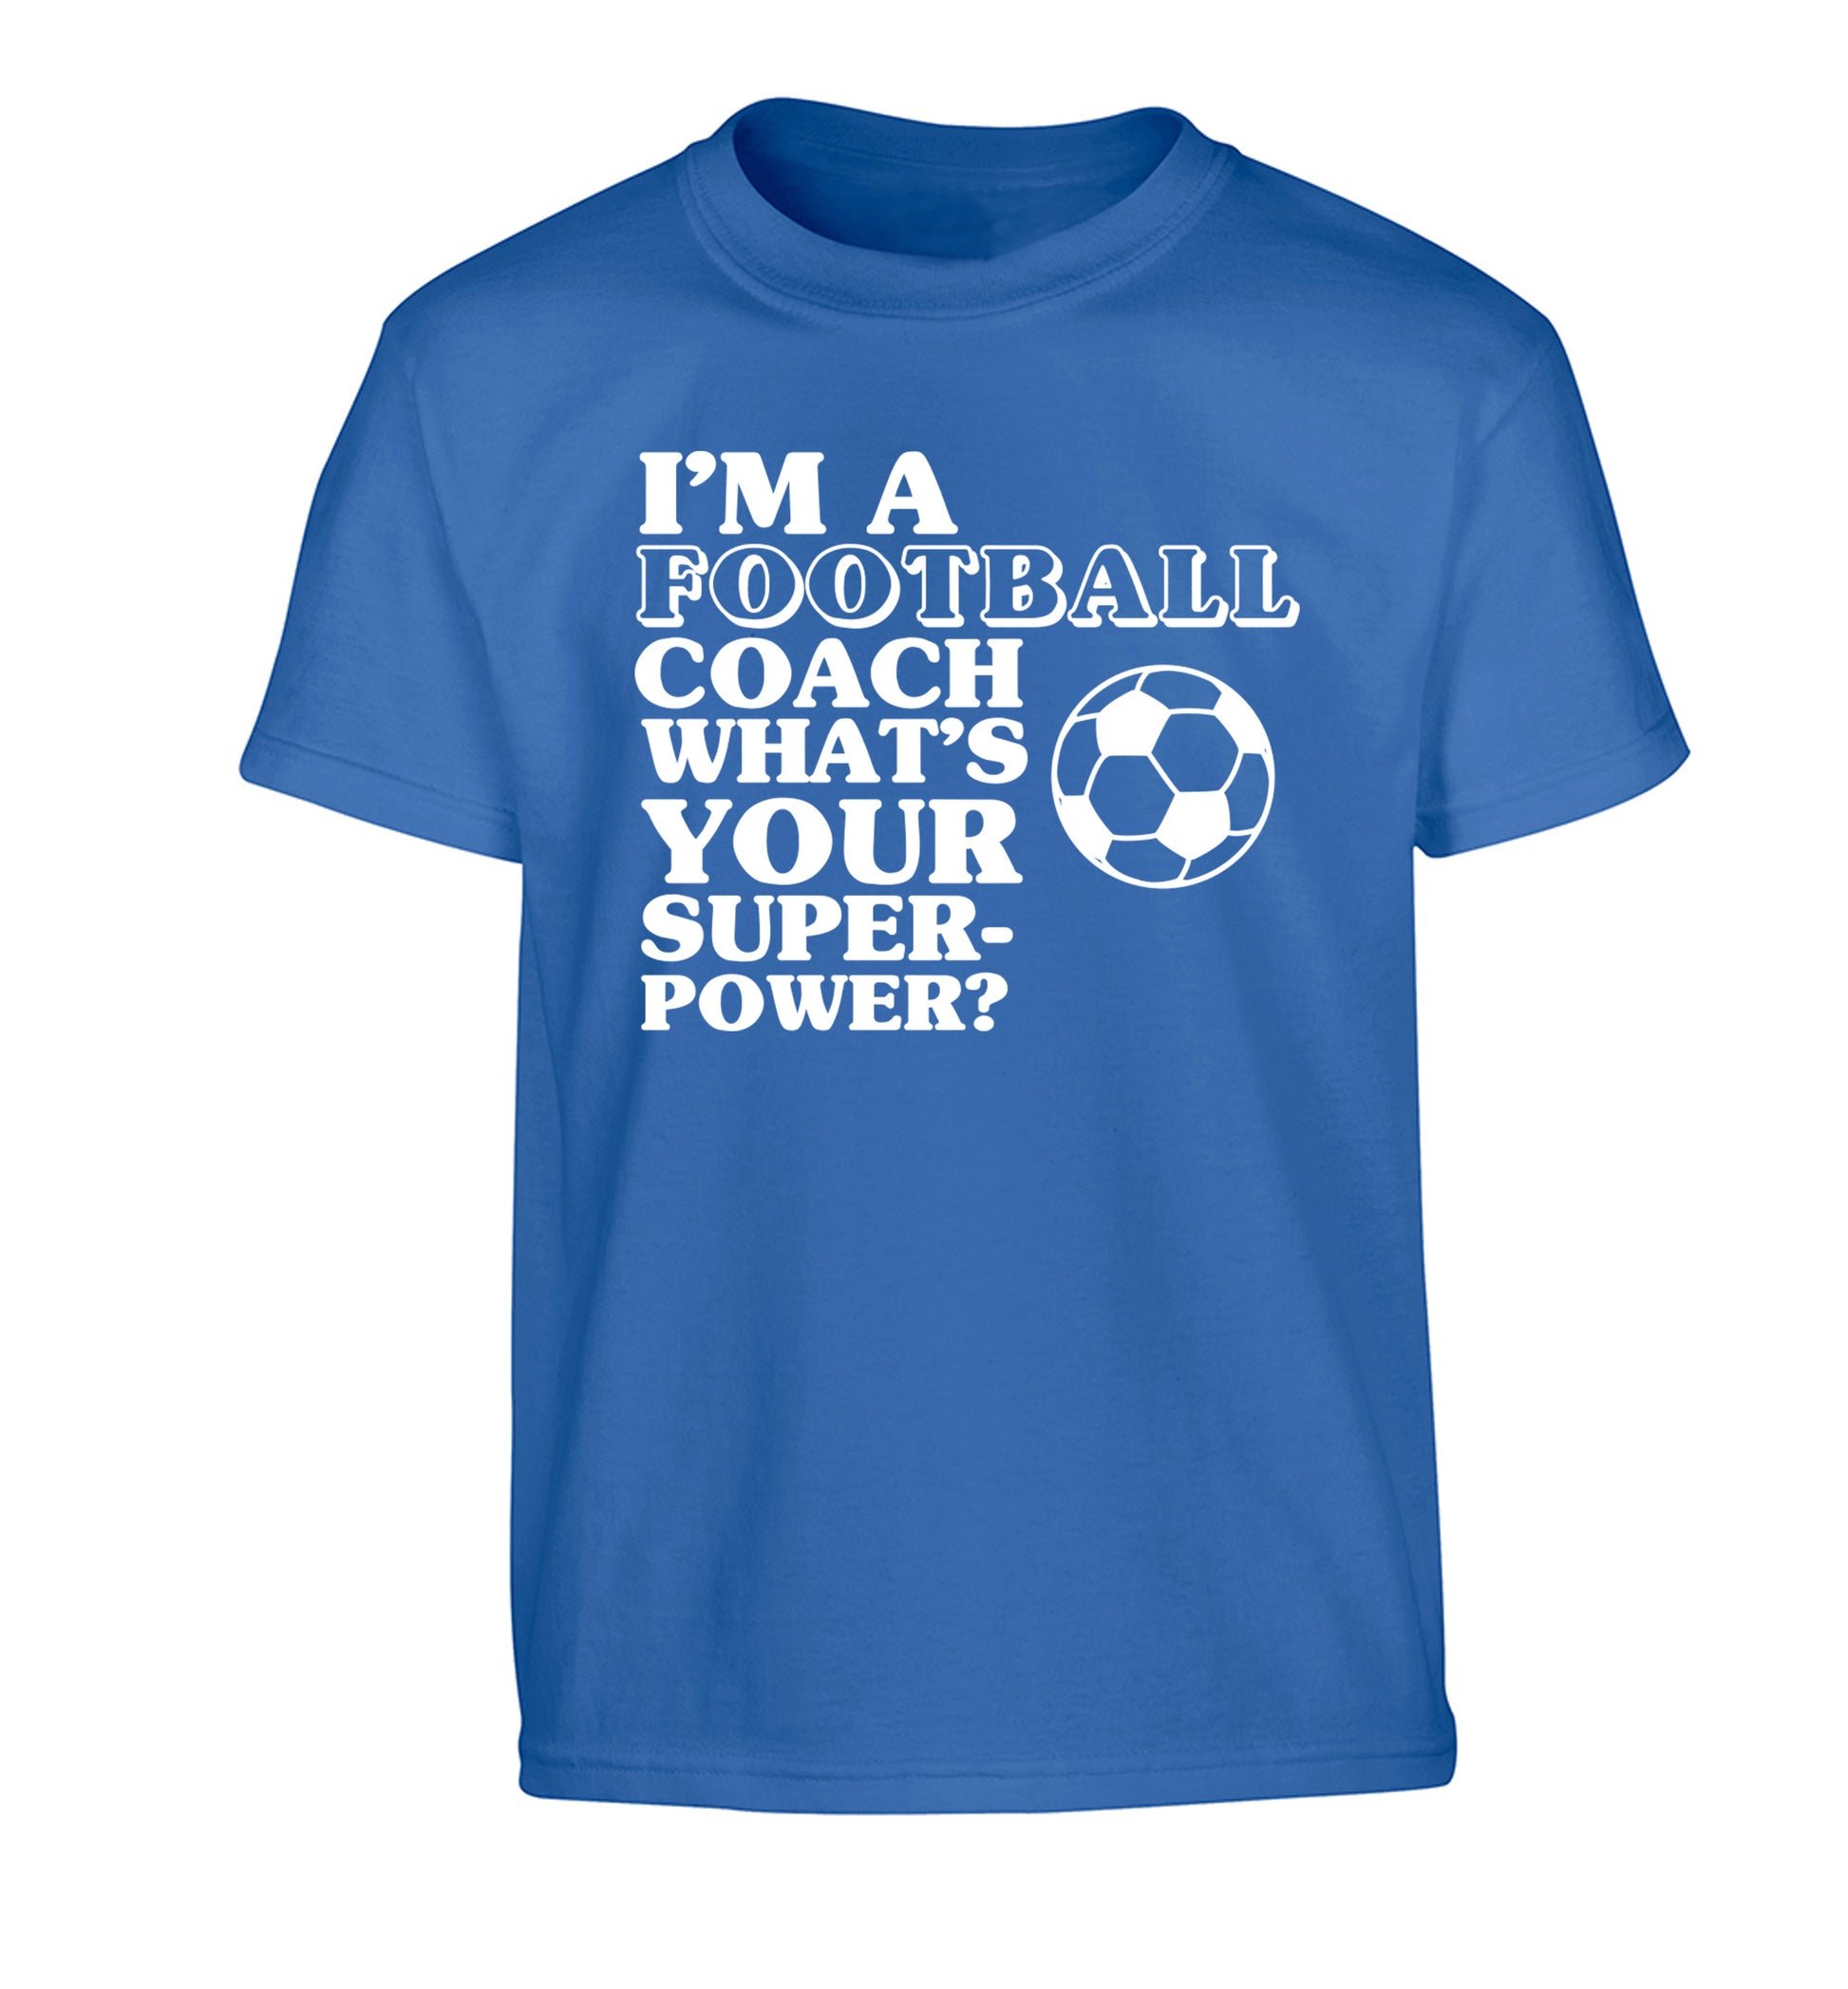 I'm a football coach what's your superpower? Children's blue Tshirt 12-14 Years